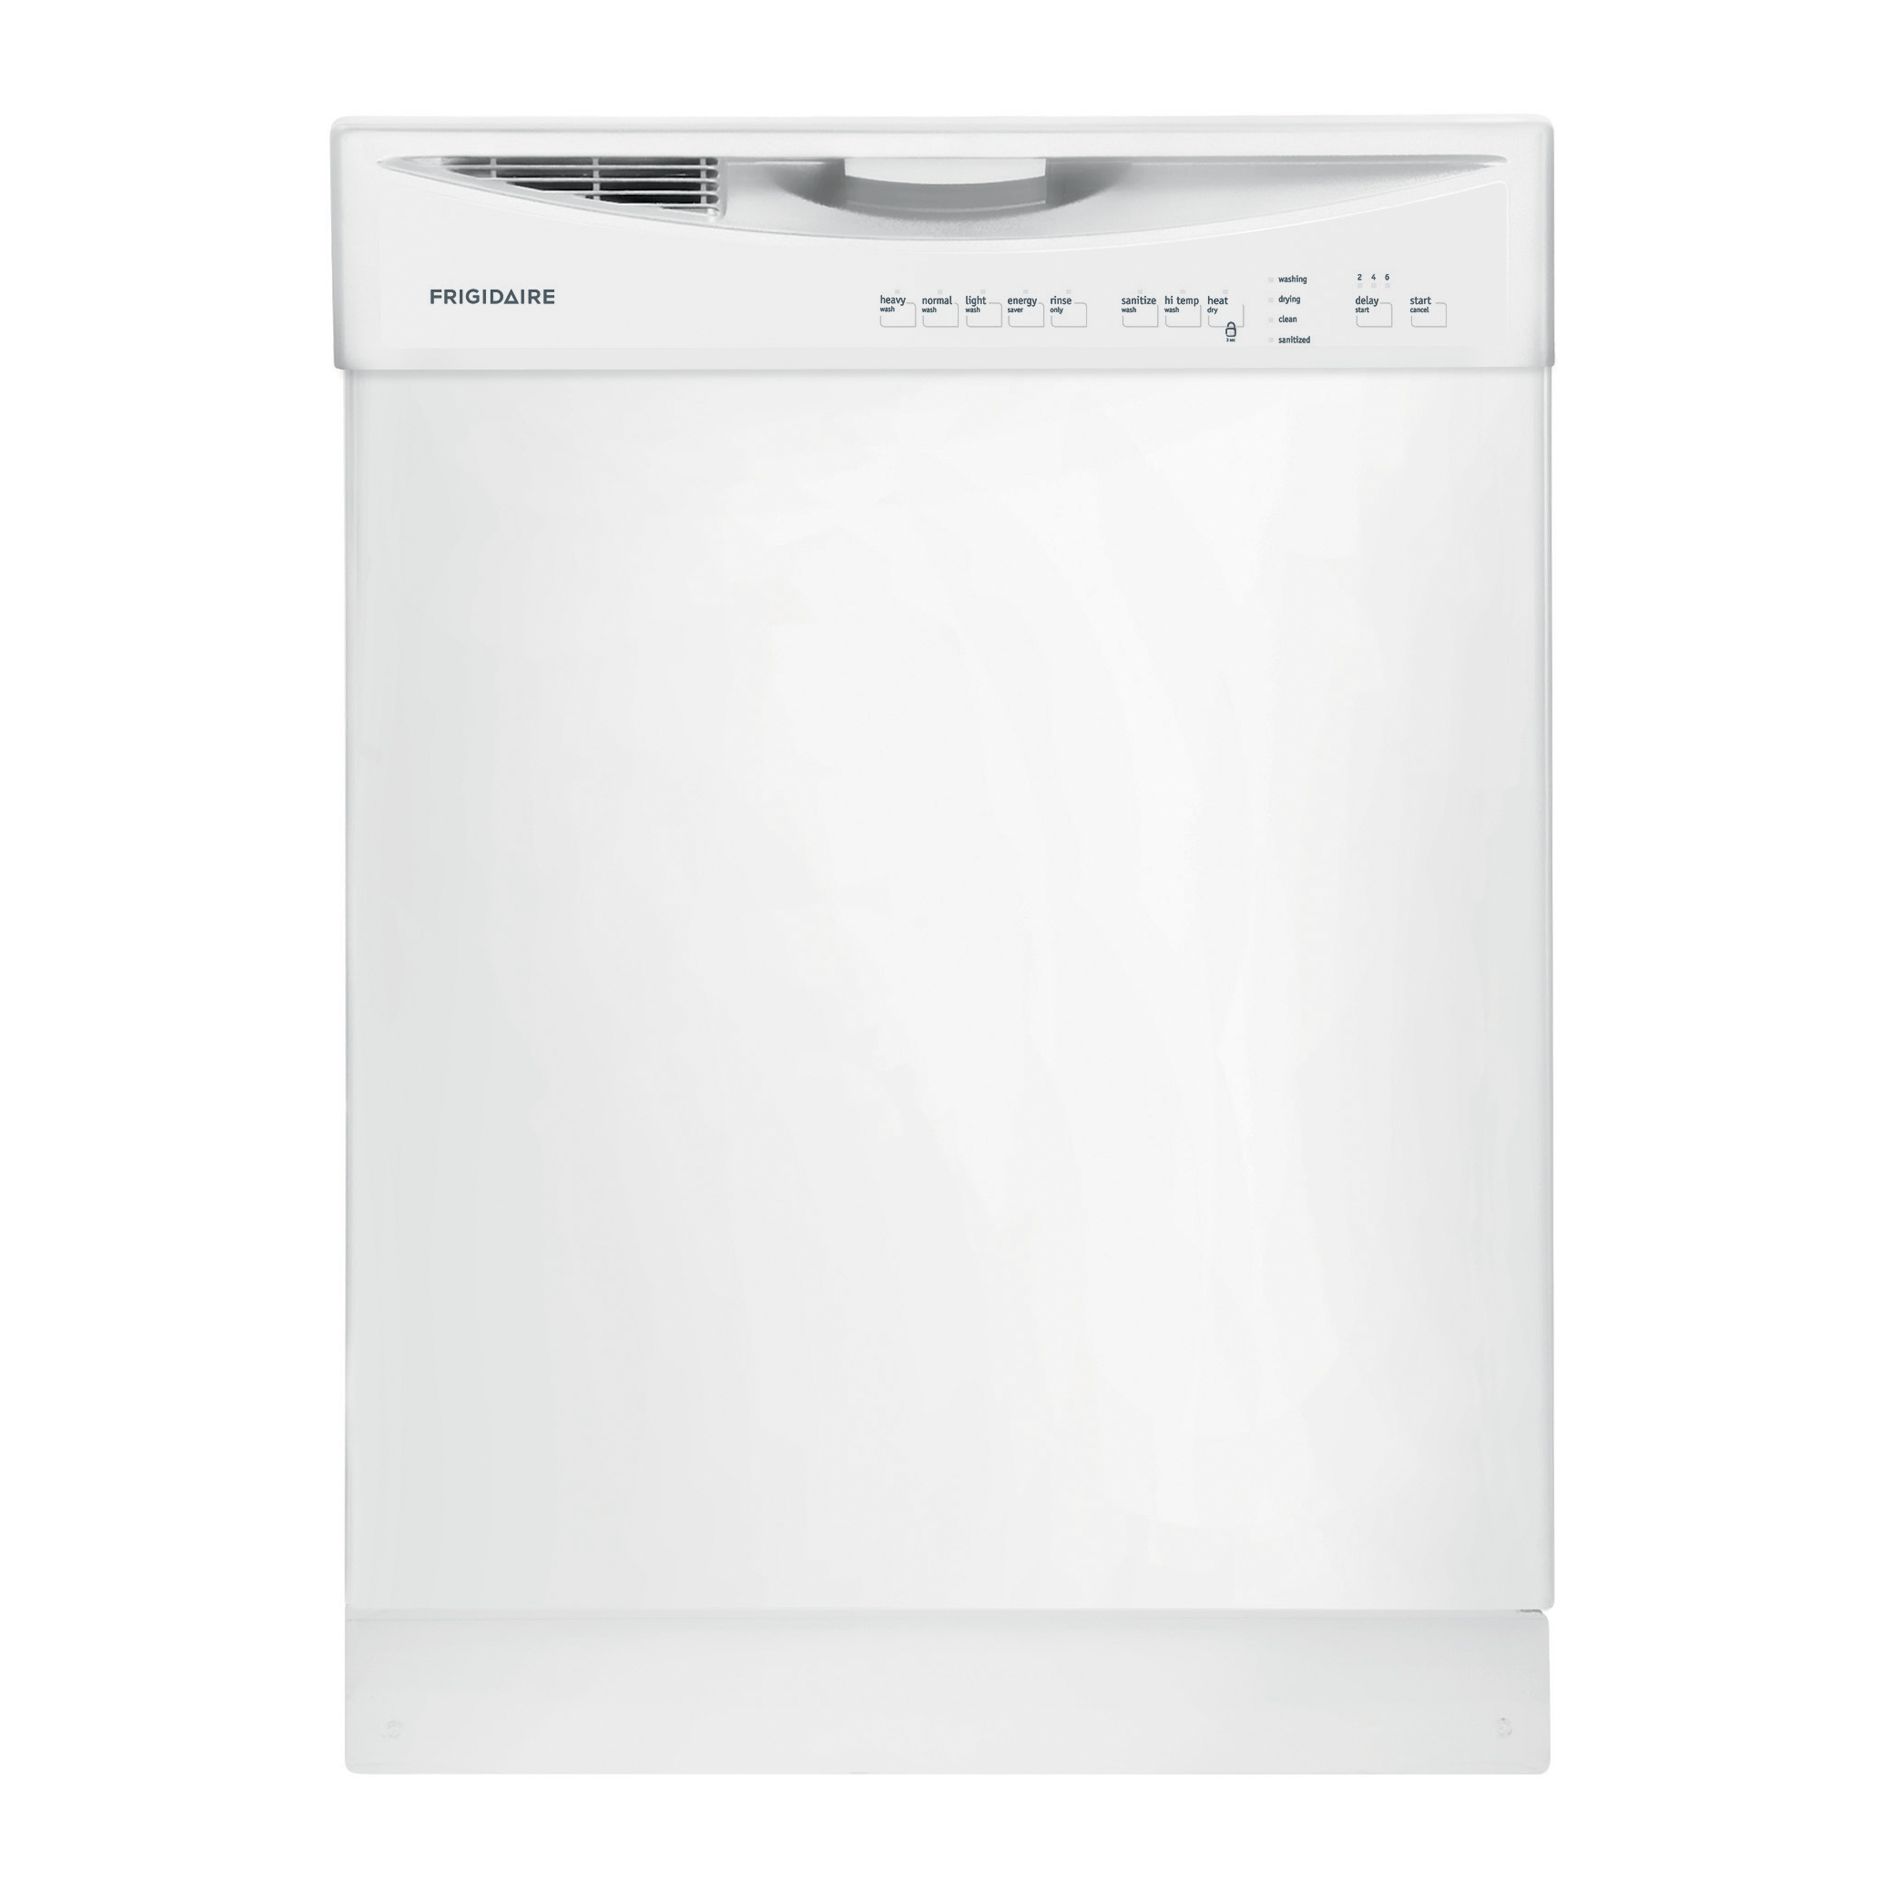 low-prices-frigidaire-ffbd2411nw-24-built-in-dishwasher-in-white